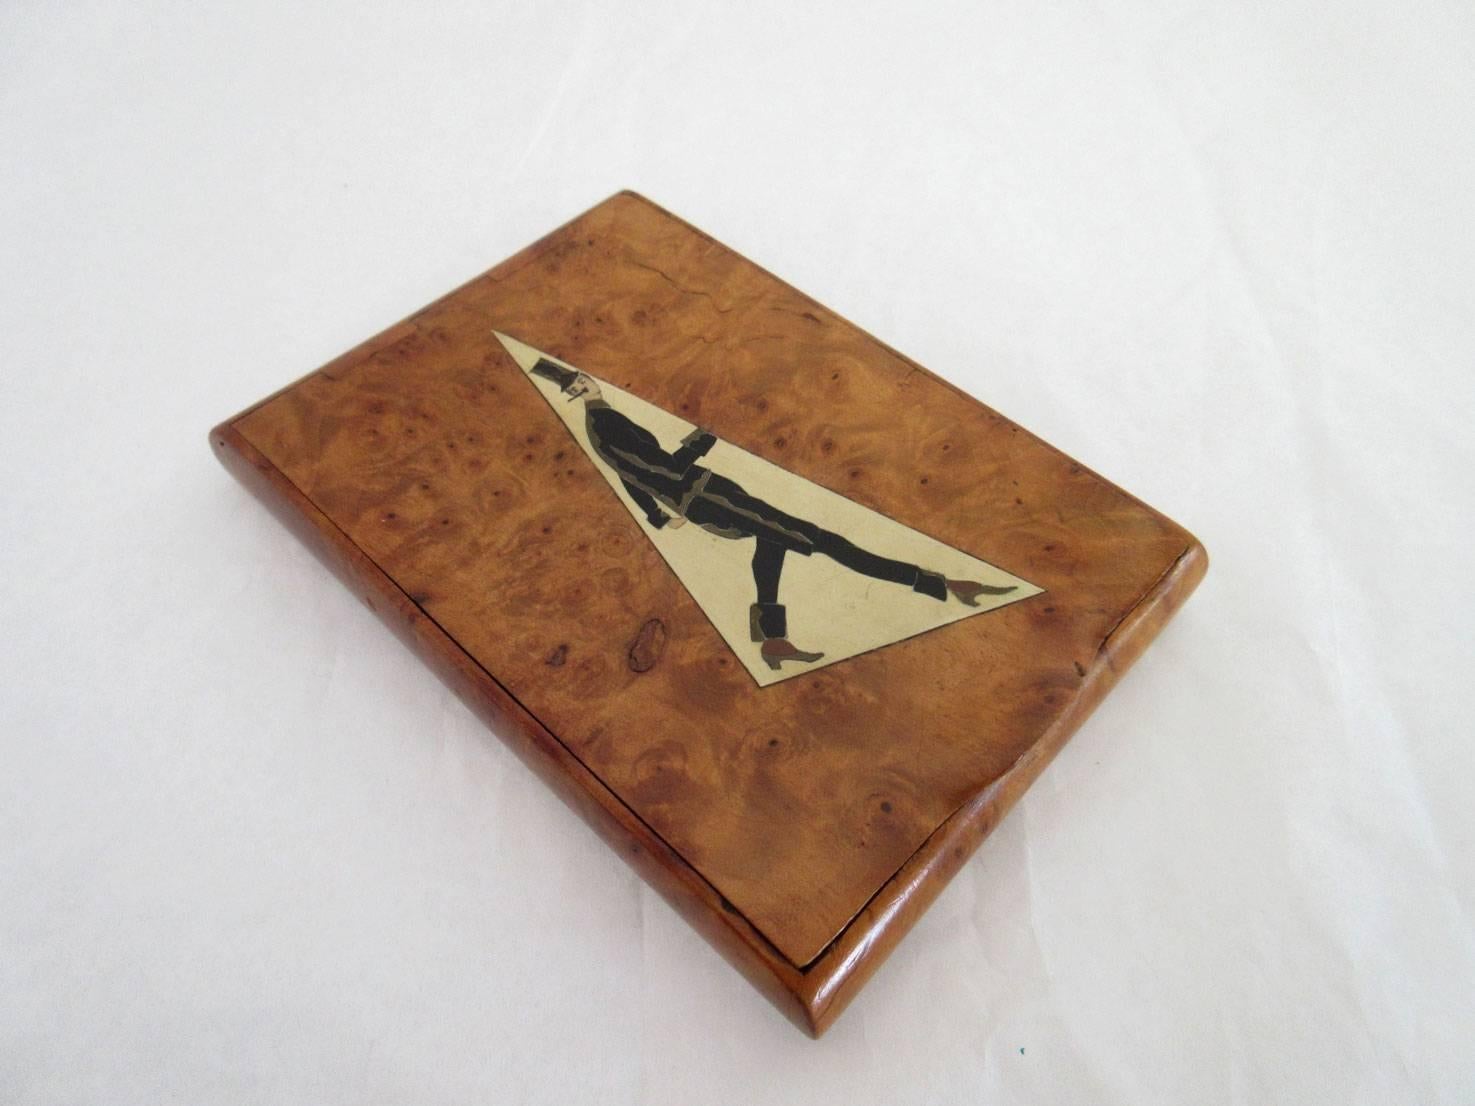 Art Deco French burl wood cigarette case with gentleman in a top hat as cover motif.